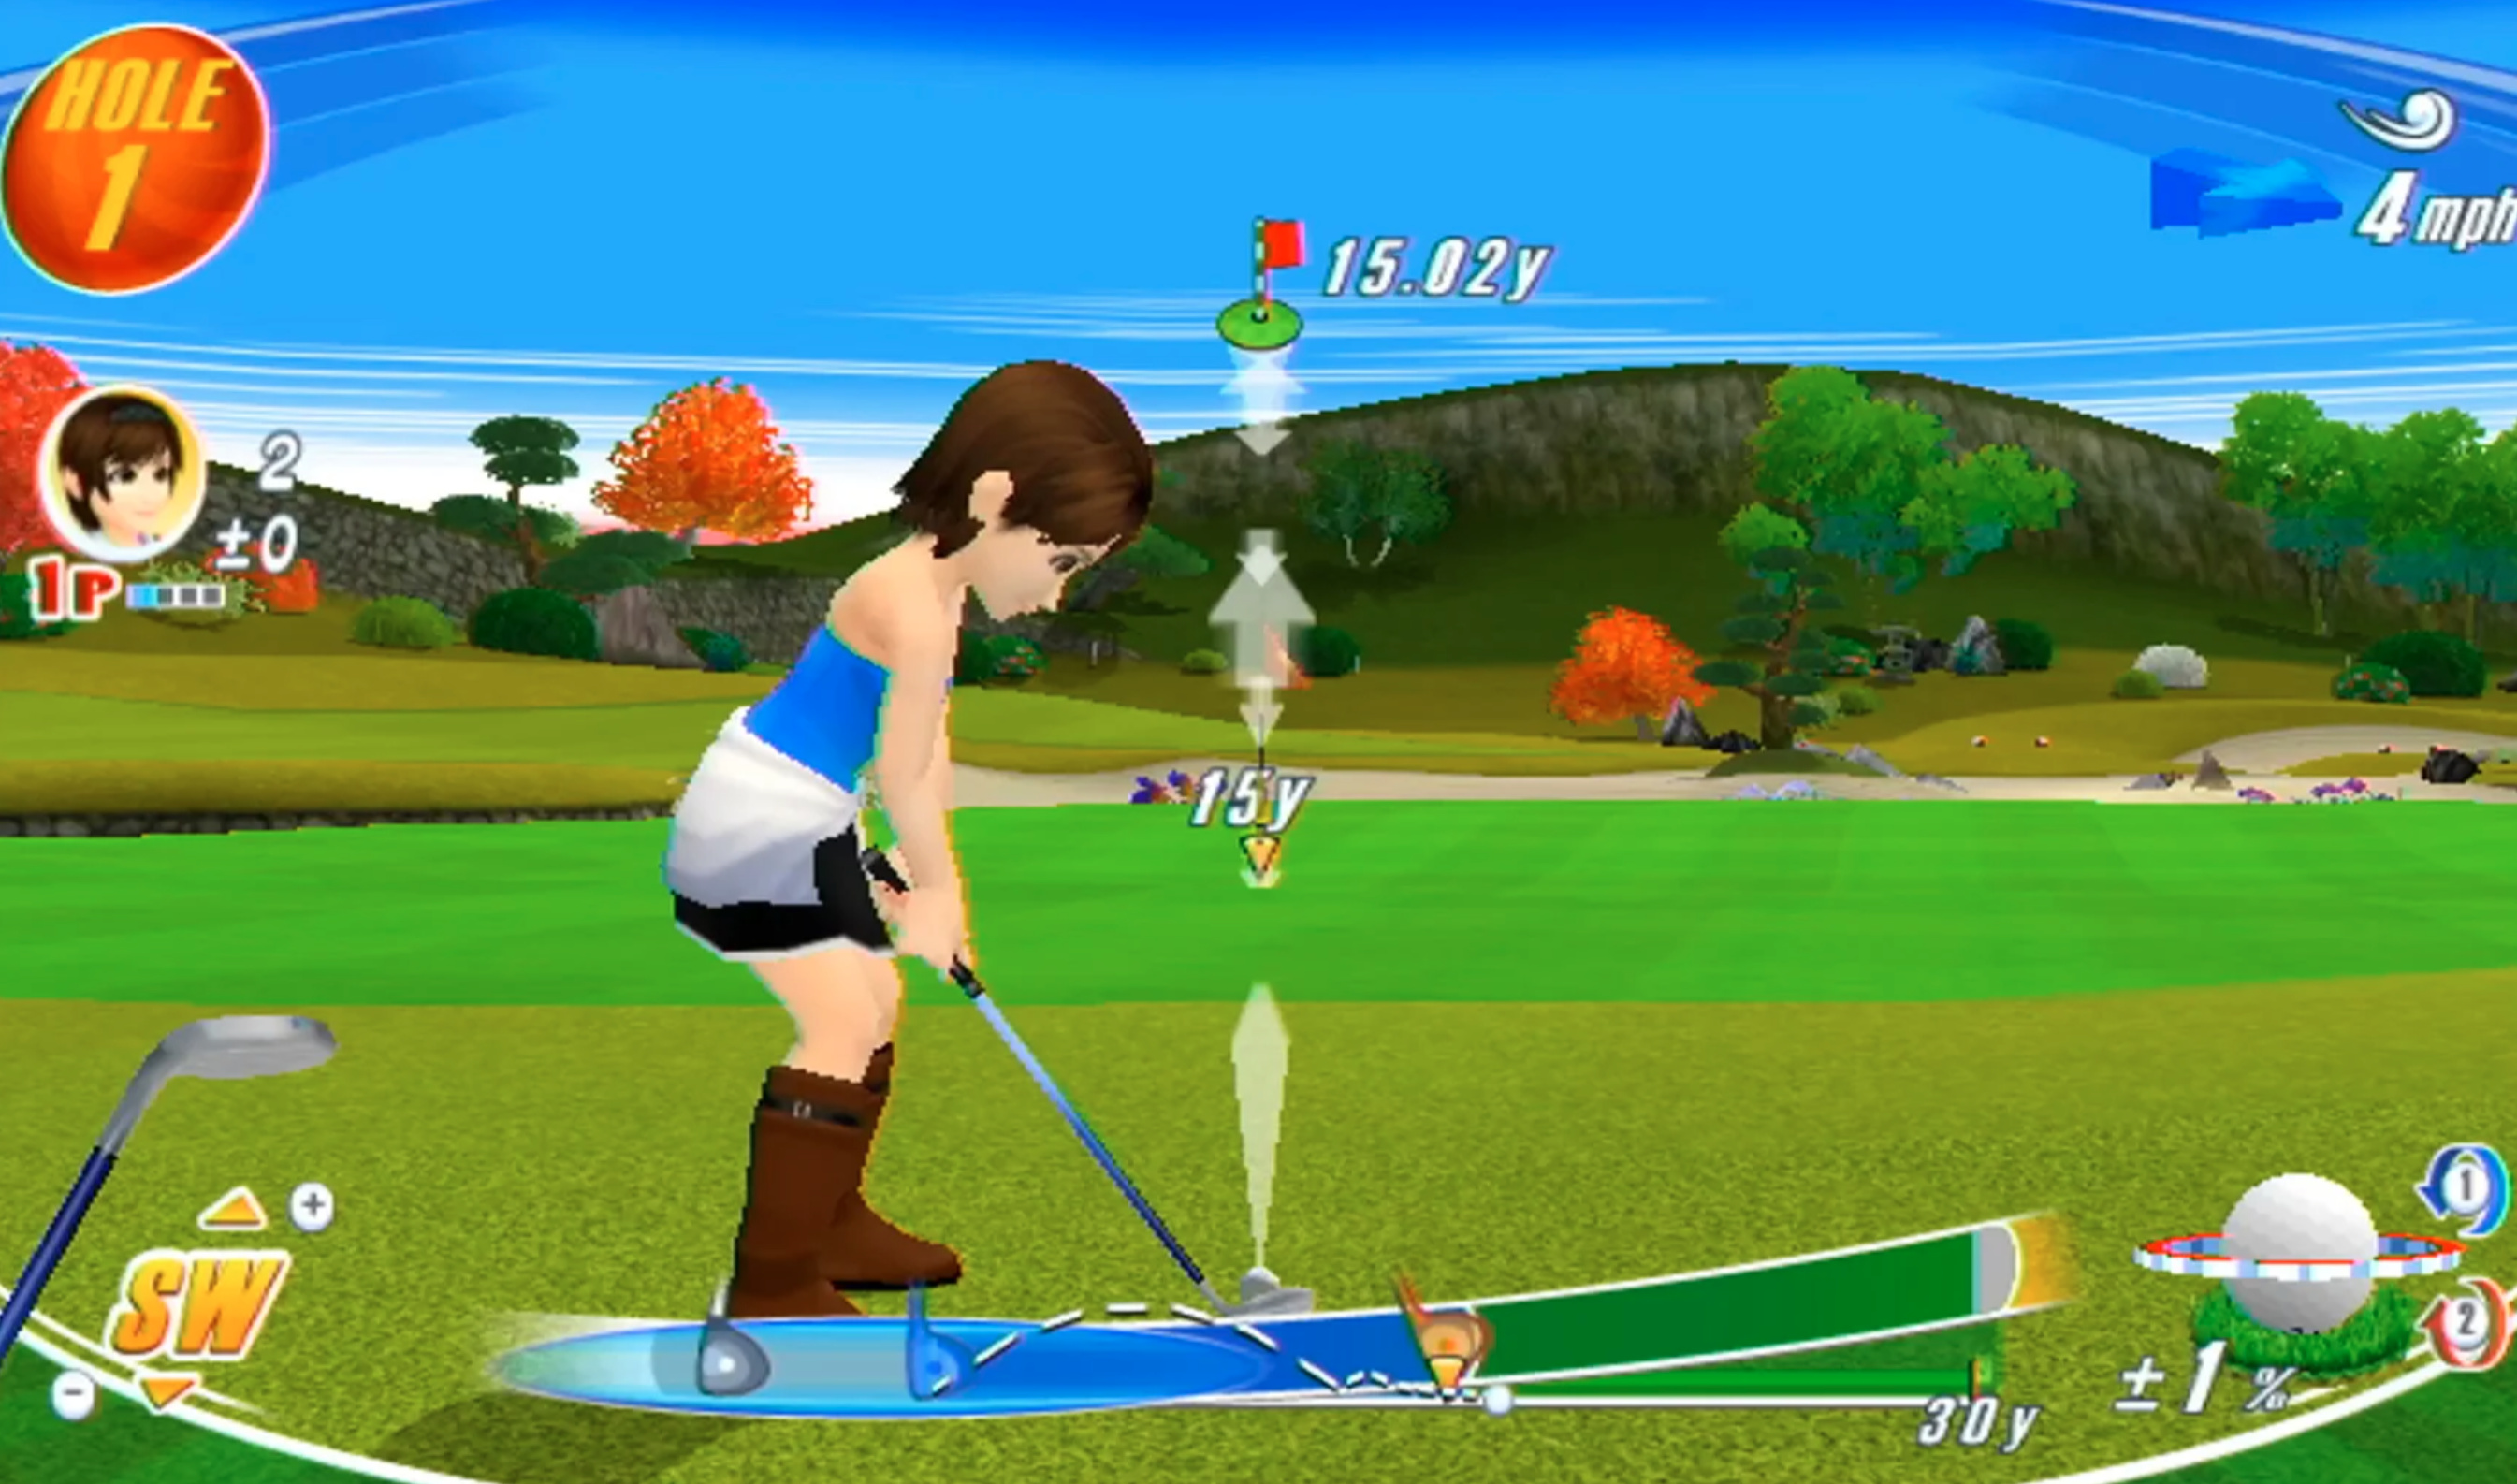 Video We Take A Look At The Hidden Mario Golf Game That Didn T Star Mario Nintendo Life